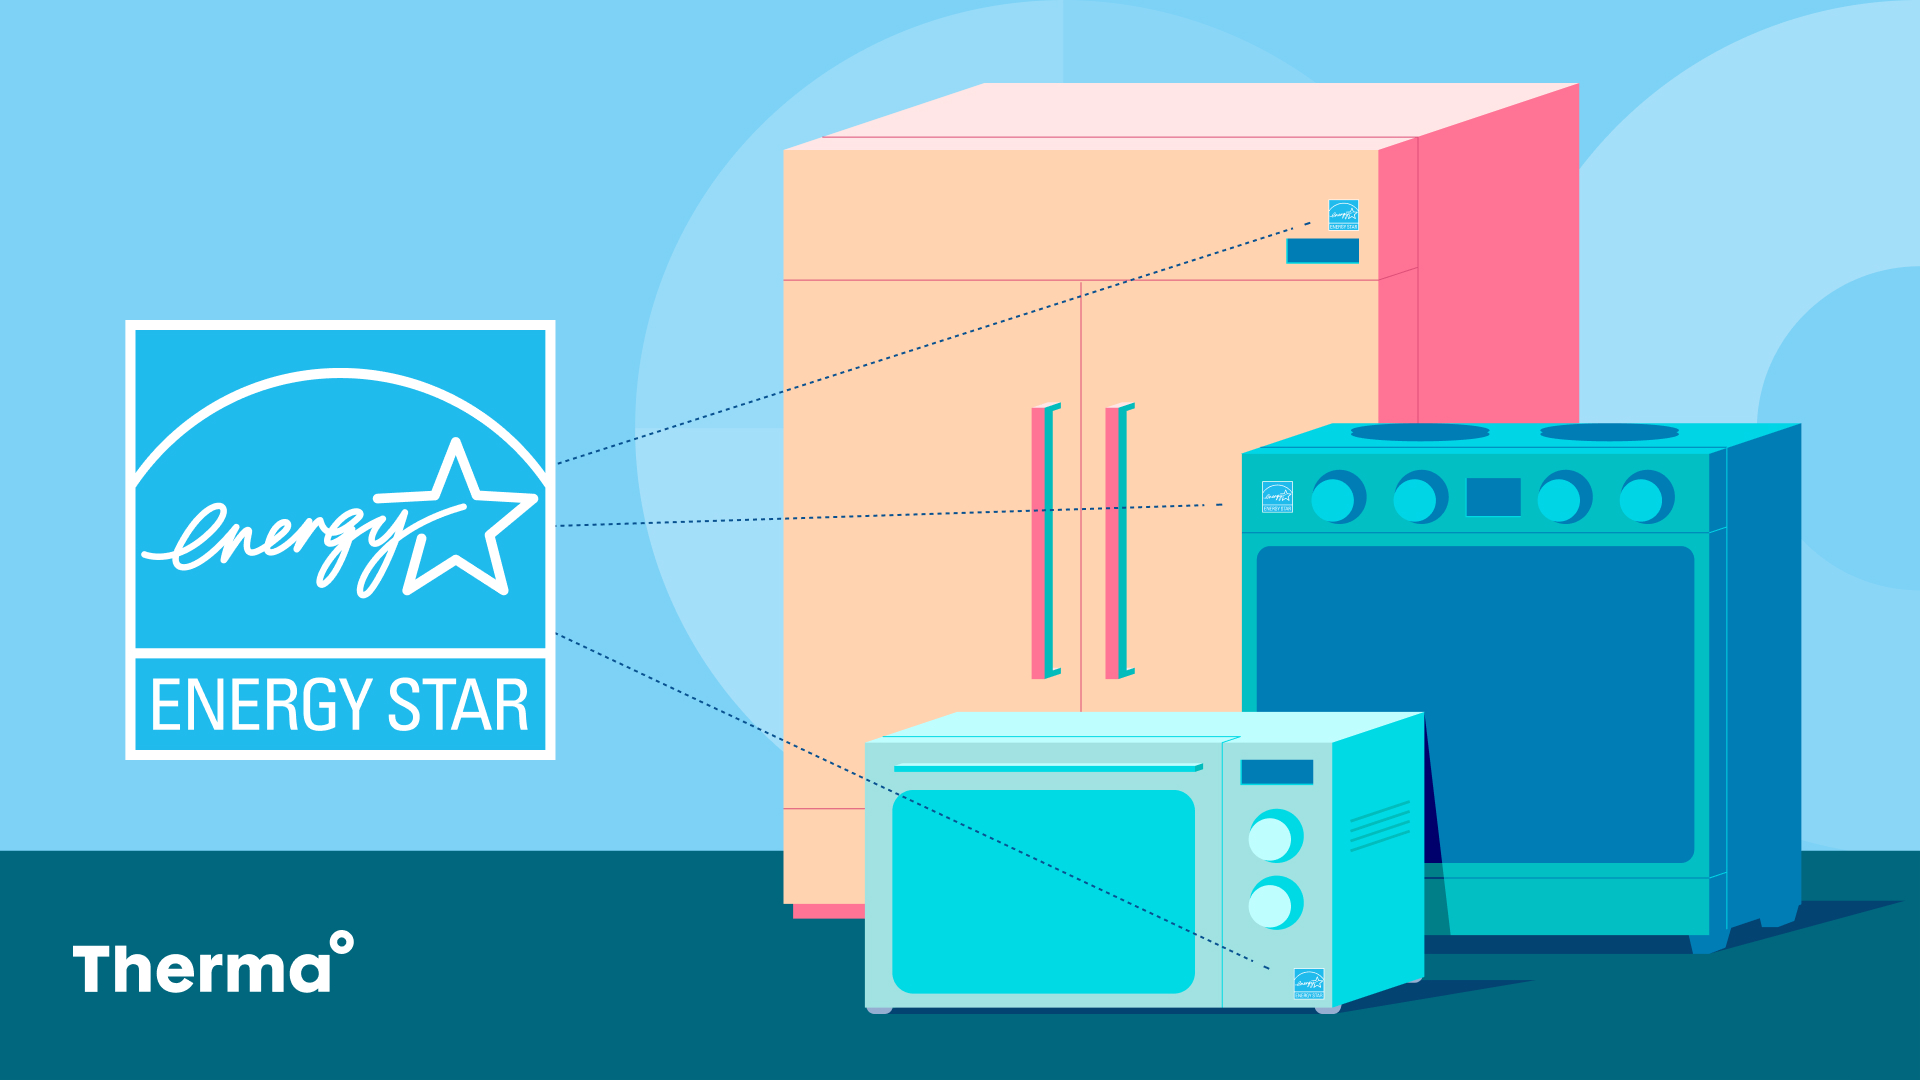 ENERGY STAR certified appliances and equipment